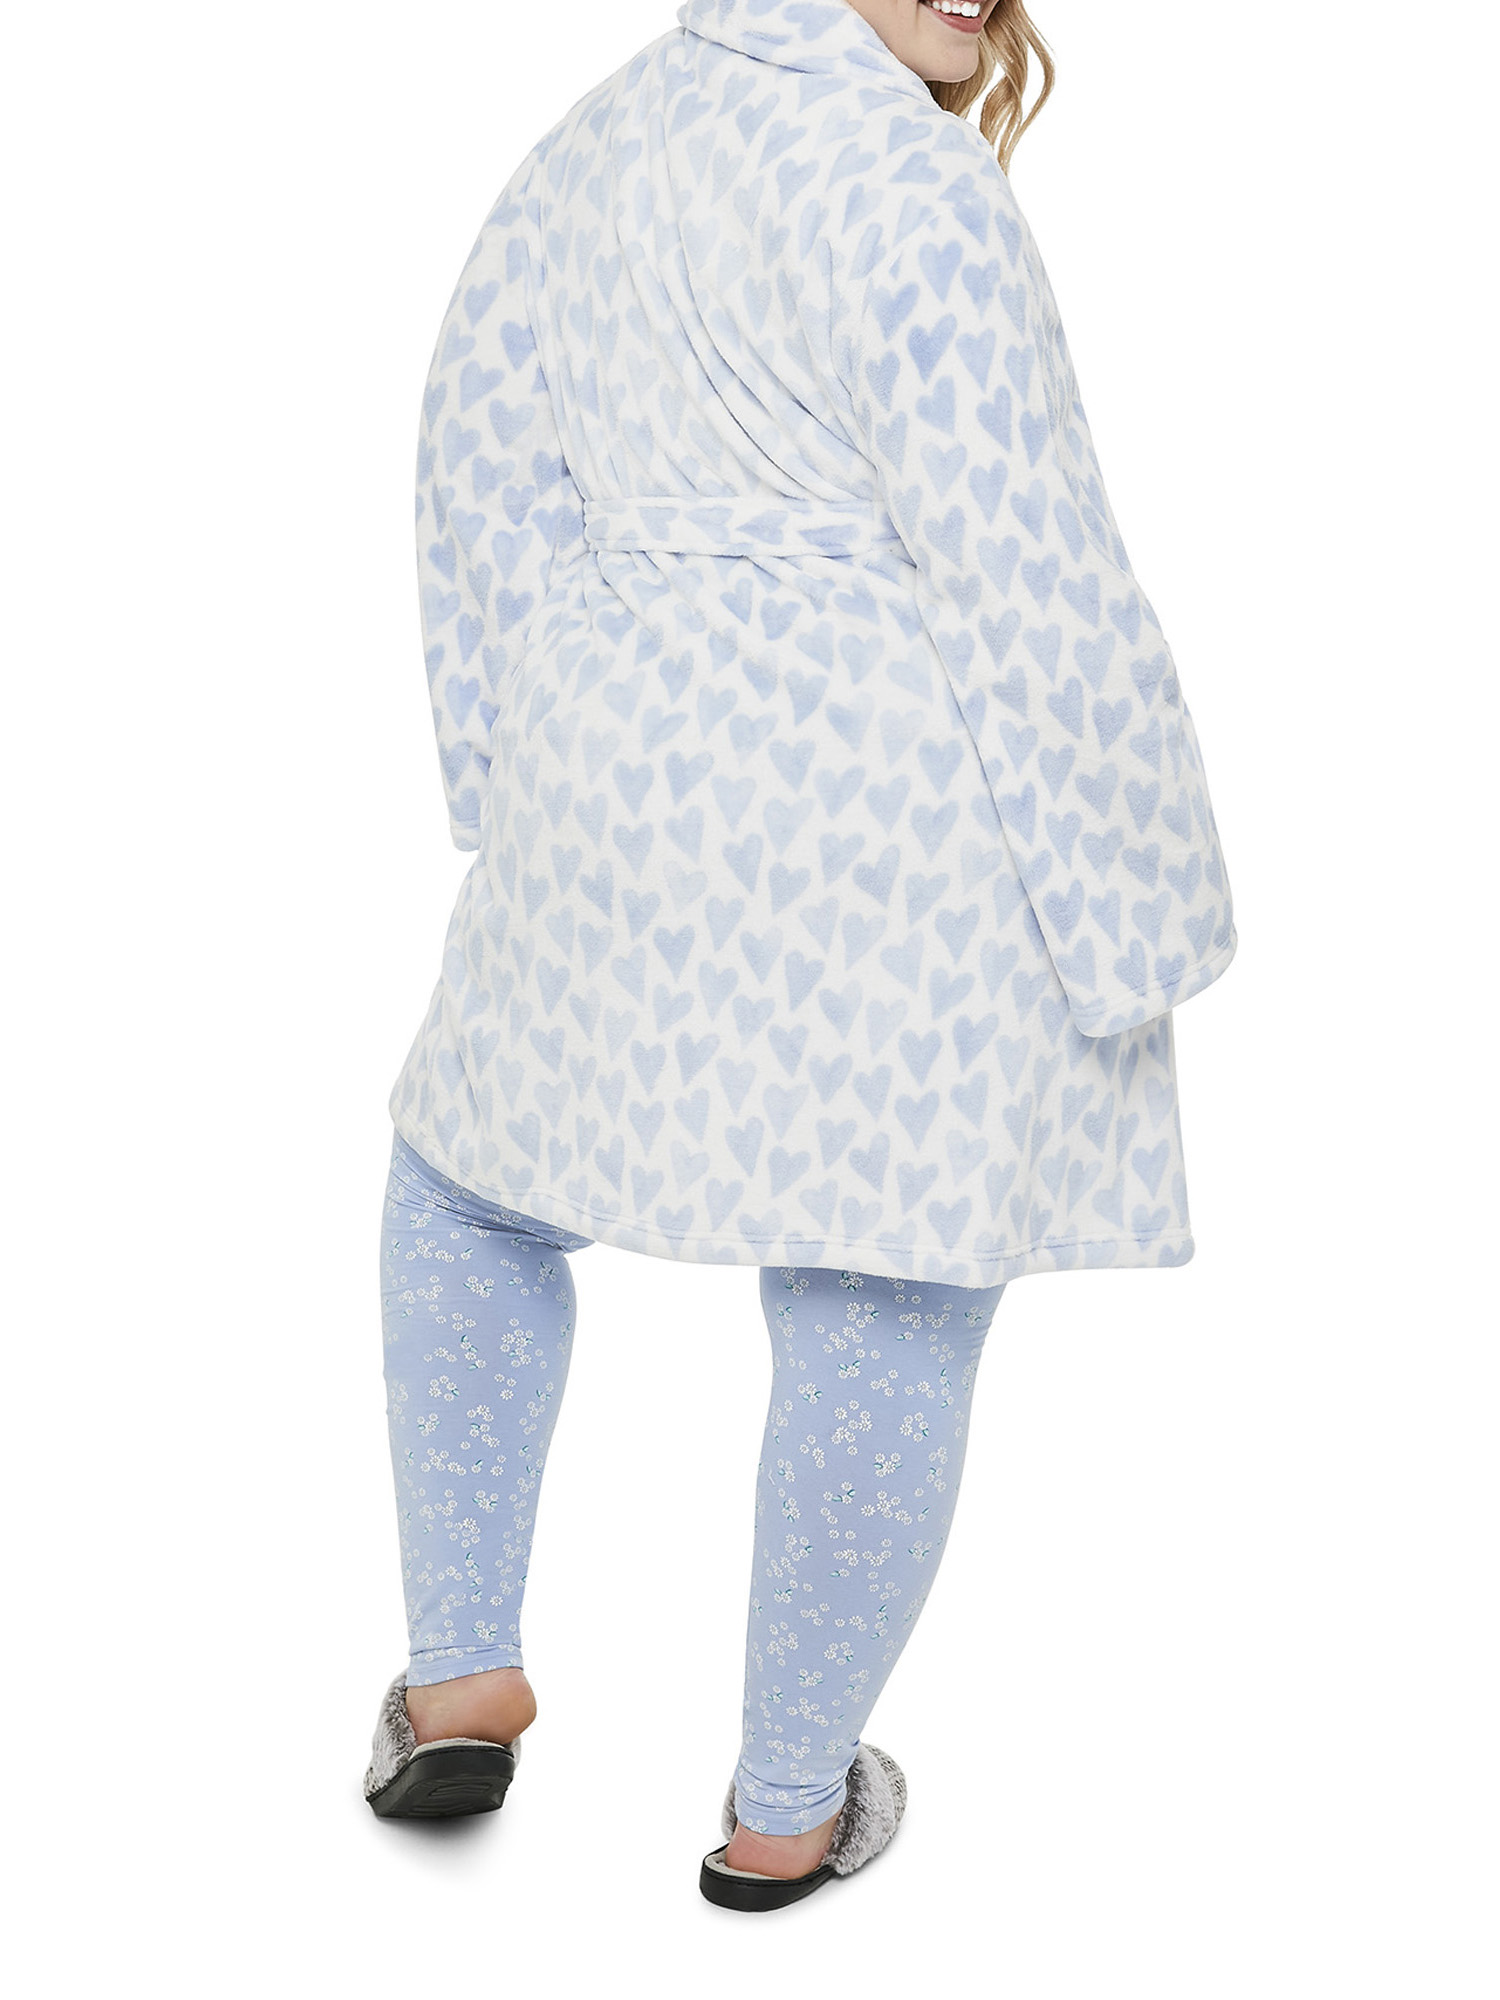 GEORGE Hearts Afternoon Polyester Robe (Women's or Women's Plus) 1 Pack - image 4 of 7